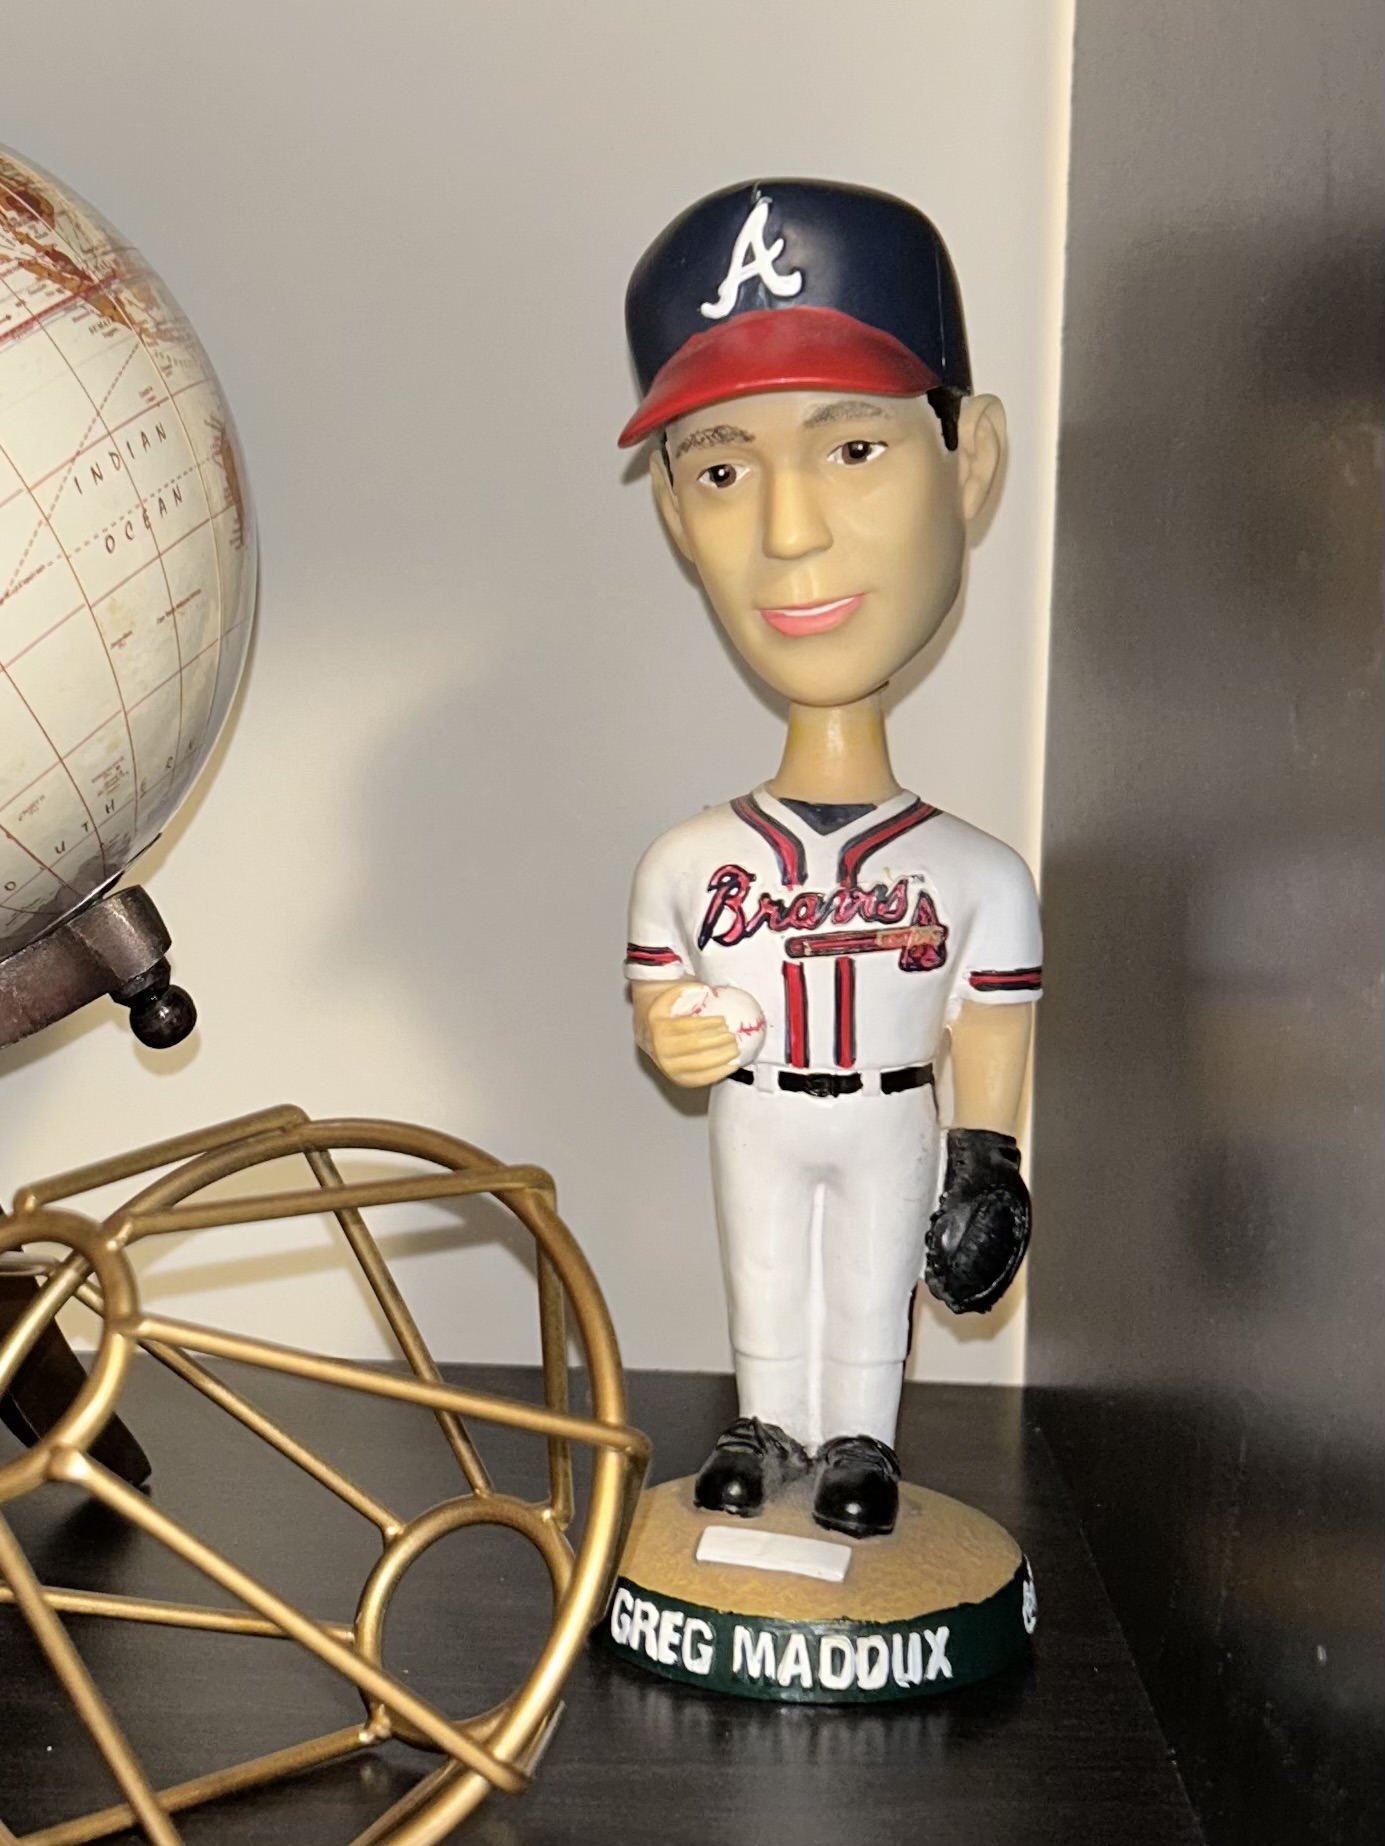 Most of his possessions were stolen, but not a Greg Maddux bobblehead